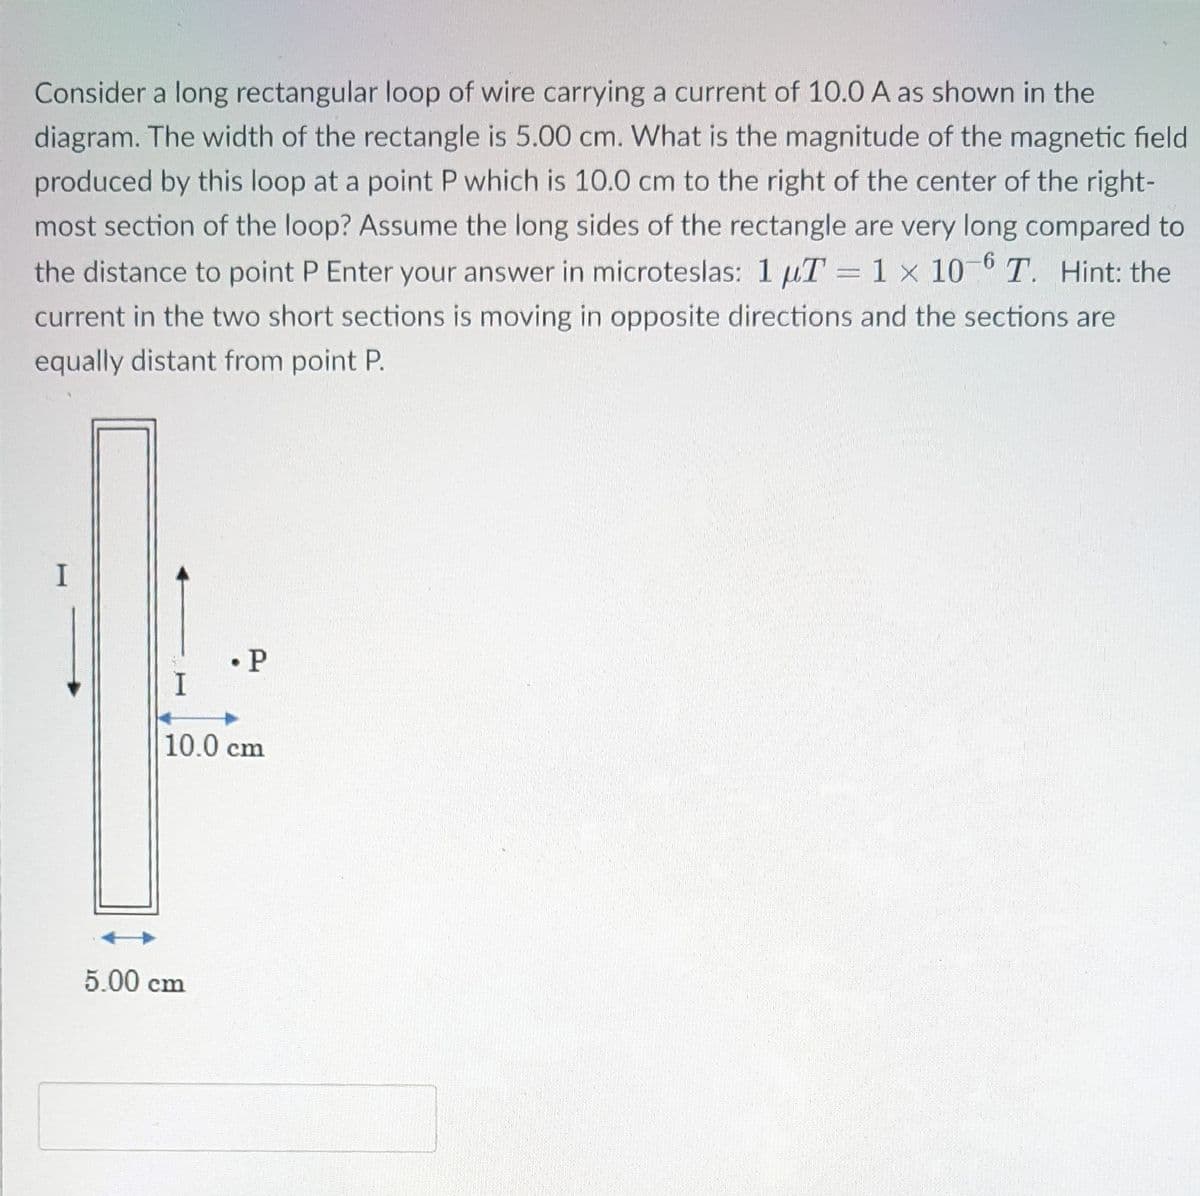 Consider a long rectangular loop of wire carrying a current of 10.0 A as shown in the
diagram. The width of the rectangle is 5.00 cm. What is the magnitude of the magnetic field
produced by this loop at a point P which is 10.0 cm to the right of the center of the right-
most section of the loop? Assume the long sides of the rectangle are very long compared to
the distance to point P Enter your answer in microteslas: 1 uT = 1 x 10- T. Hint: the
current in the two short sections is moving in opposite directions and the sections are
equally distant from point P.
• P
10.0 cm
5.00 cm
